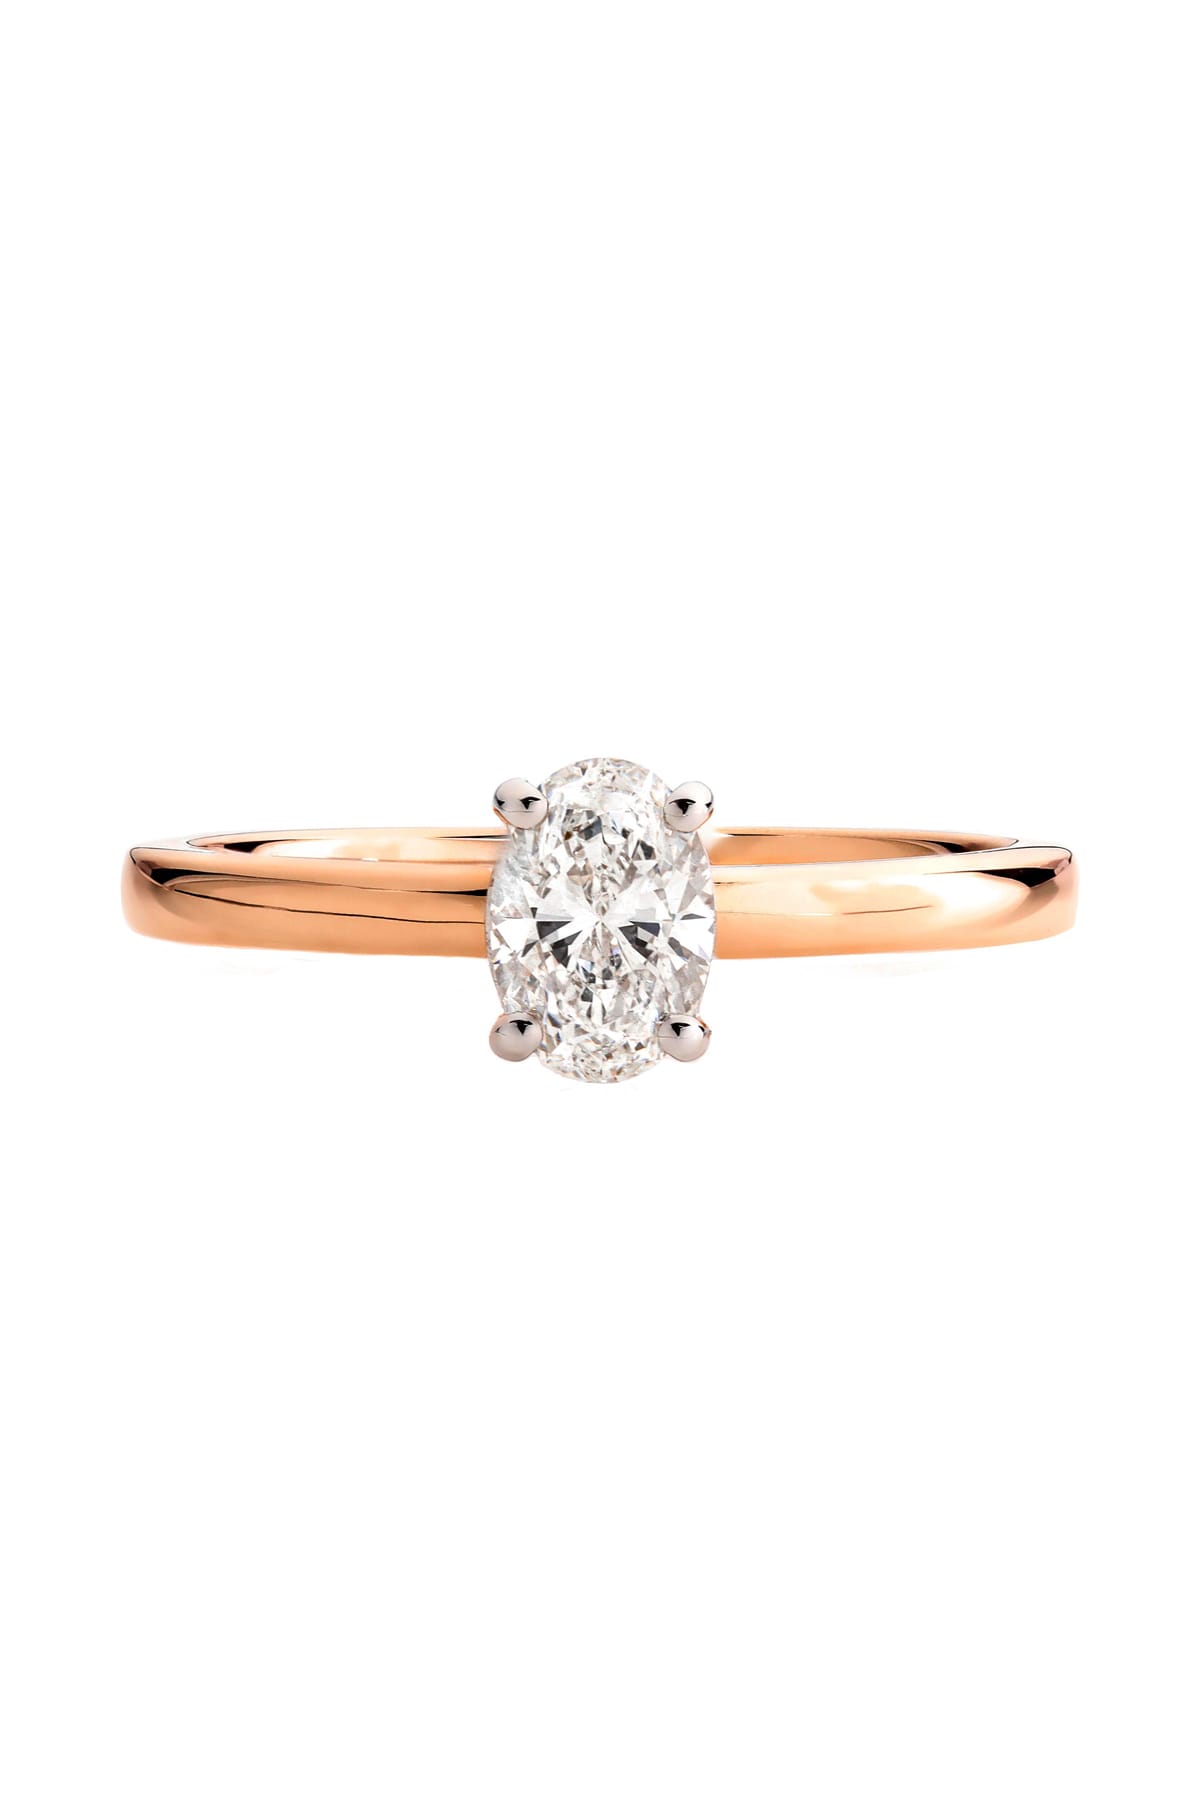 18 Carat Gold With 0.50 Carat Oval Diamond Engagement Ring available at LeGassick Diamonds and Jewellery Gold Coast, Australia.